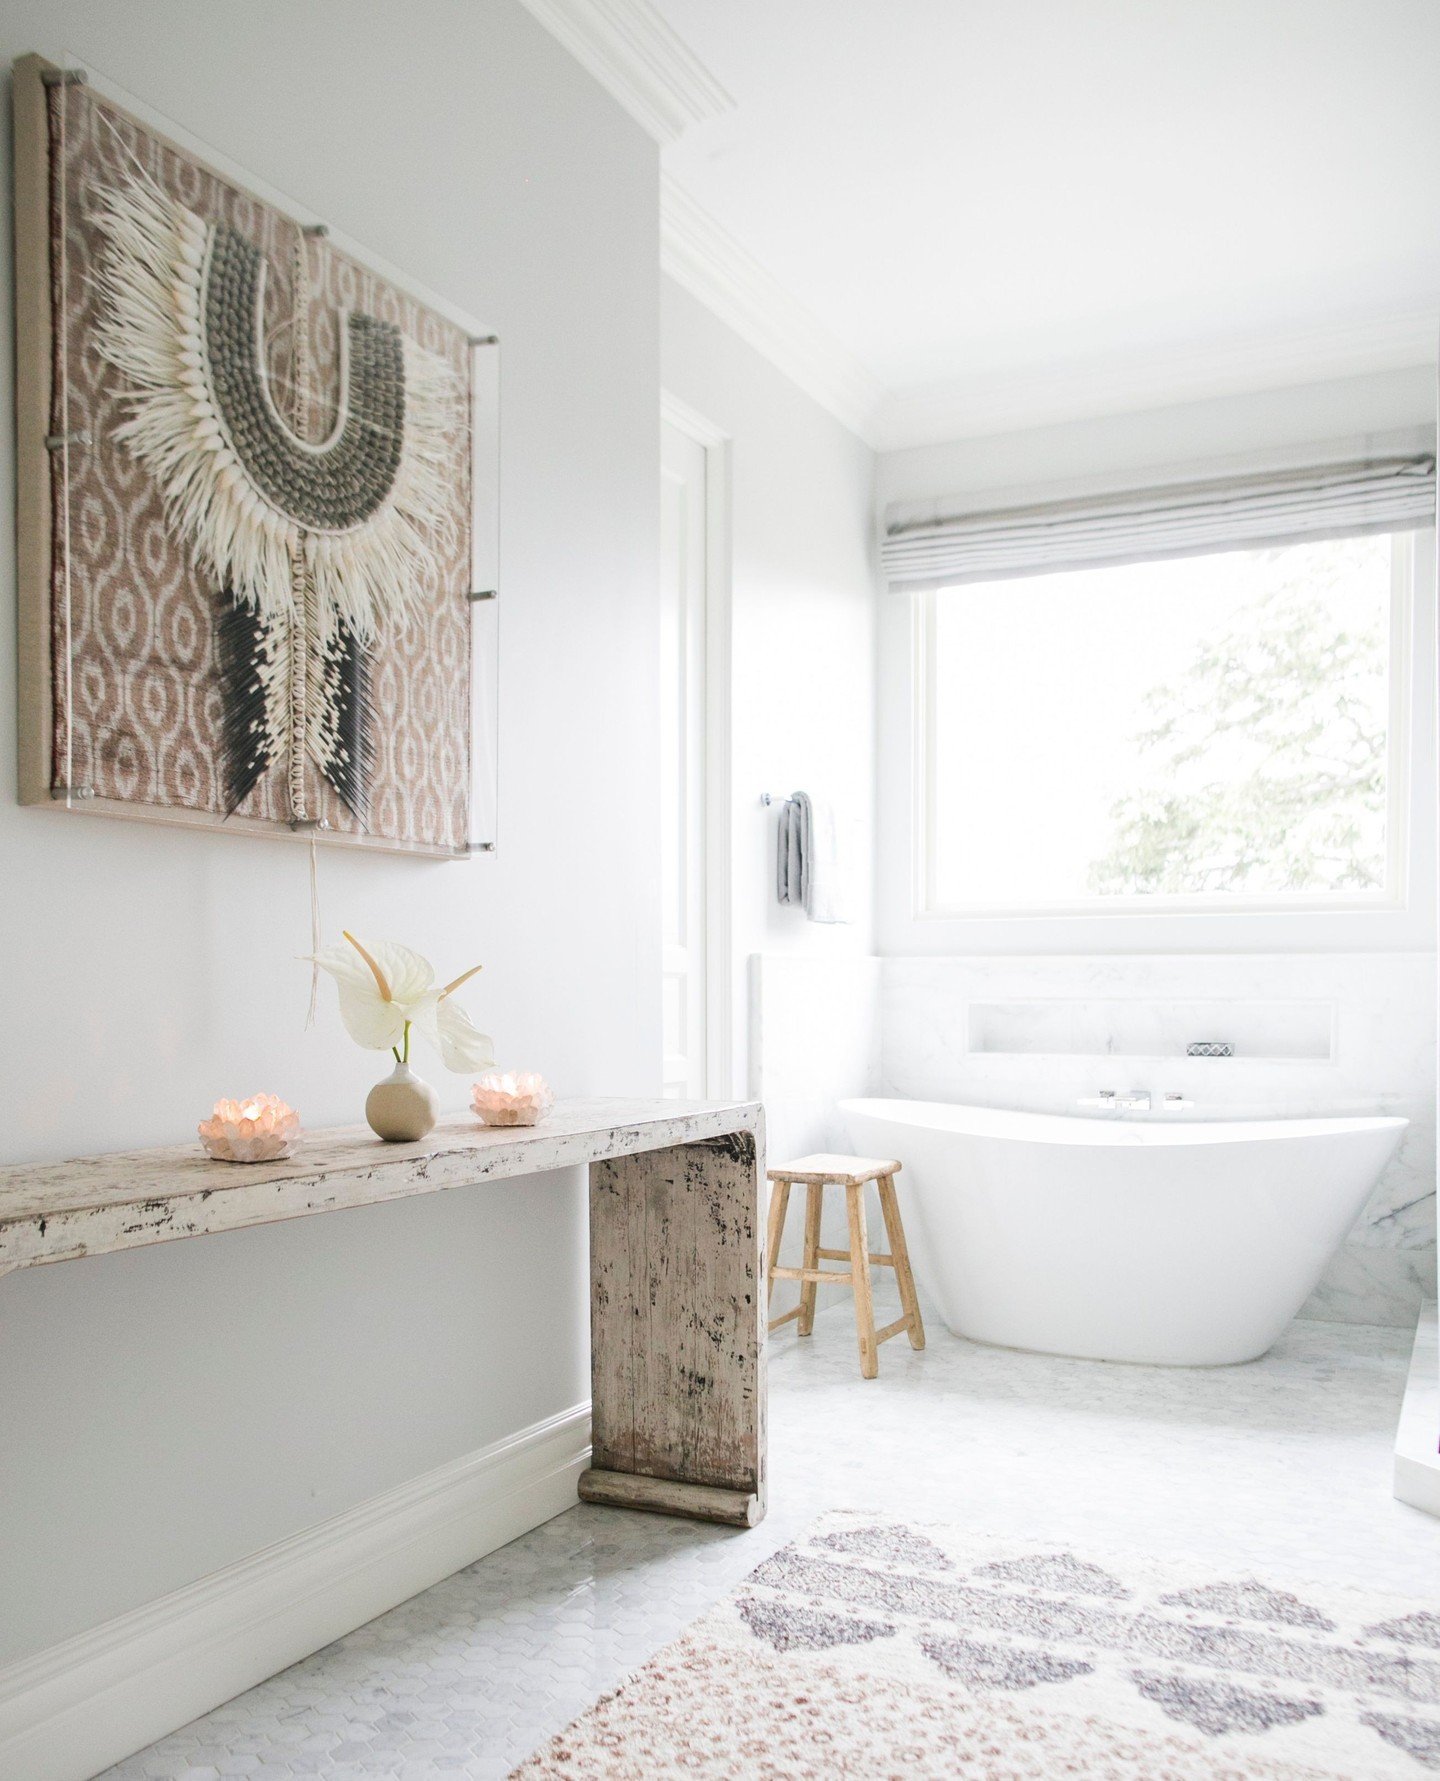 Taking a moment for yourself is SO important. This beautiful bathroom is the perfect place to do it. Let me help you create that in your home! Get in touch! ✨